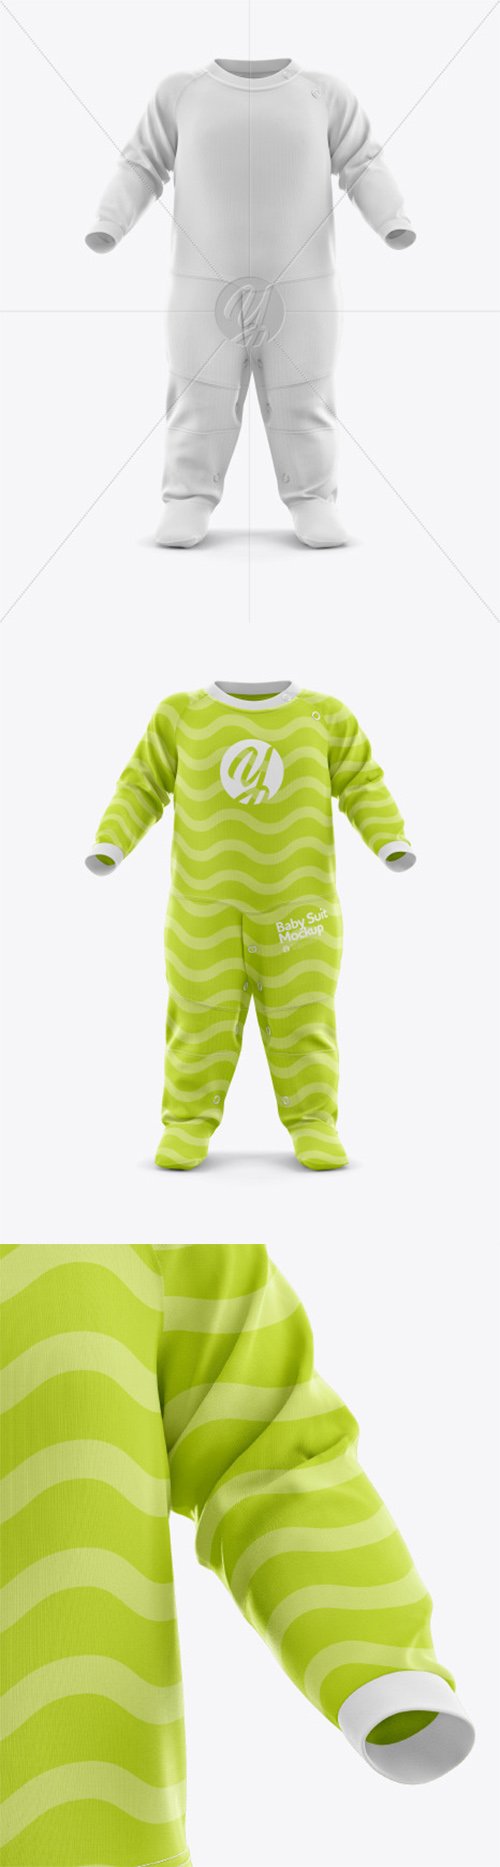 Baby Suit Mockup - Front View 44243 TIF